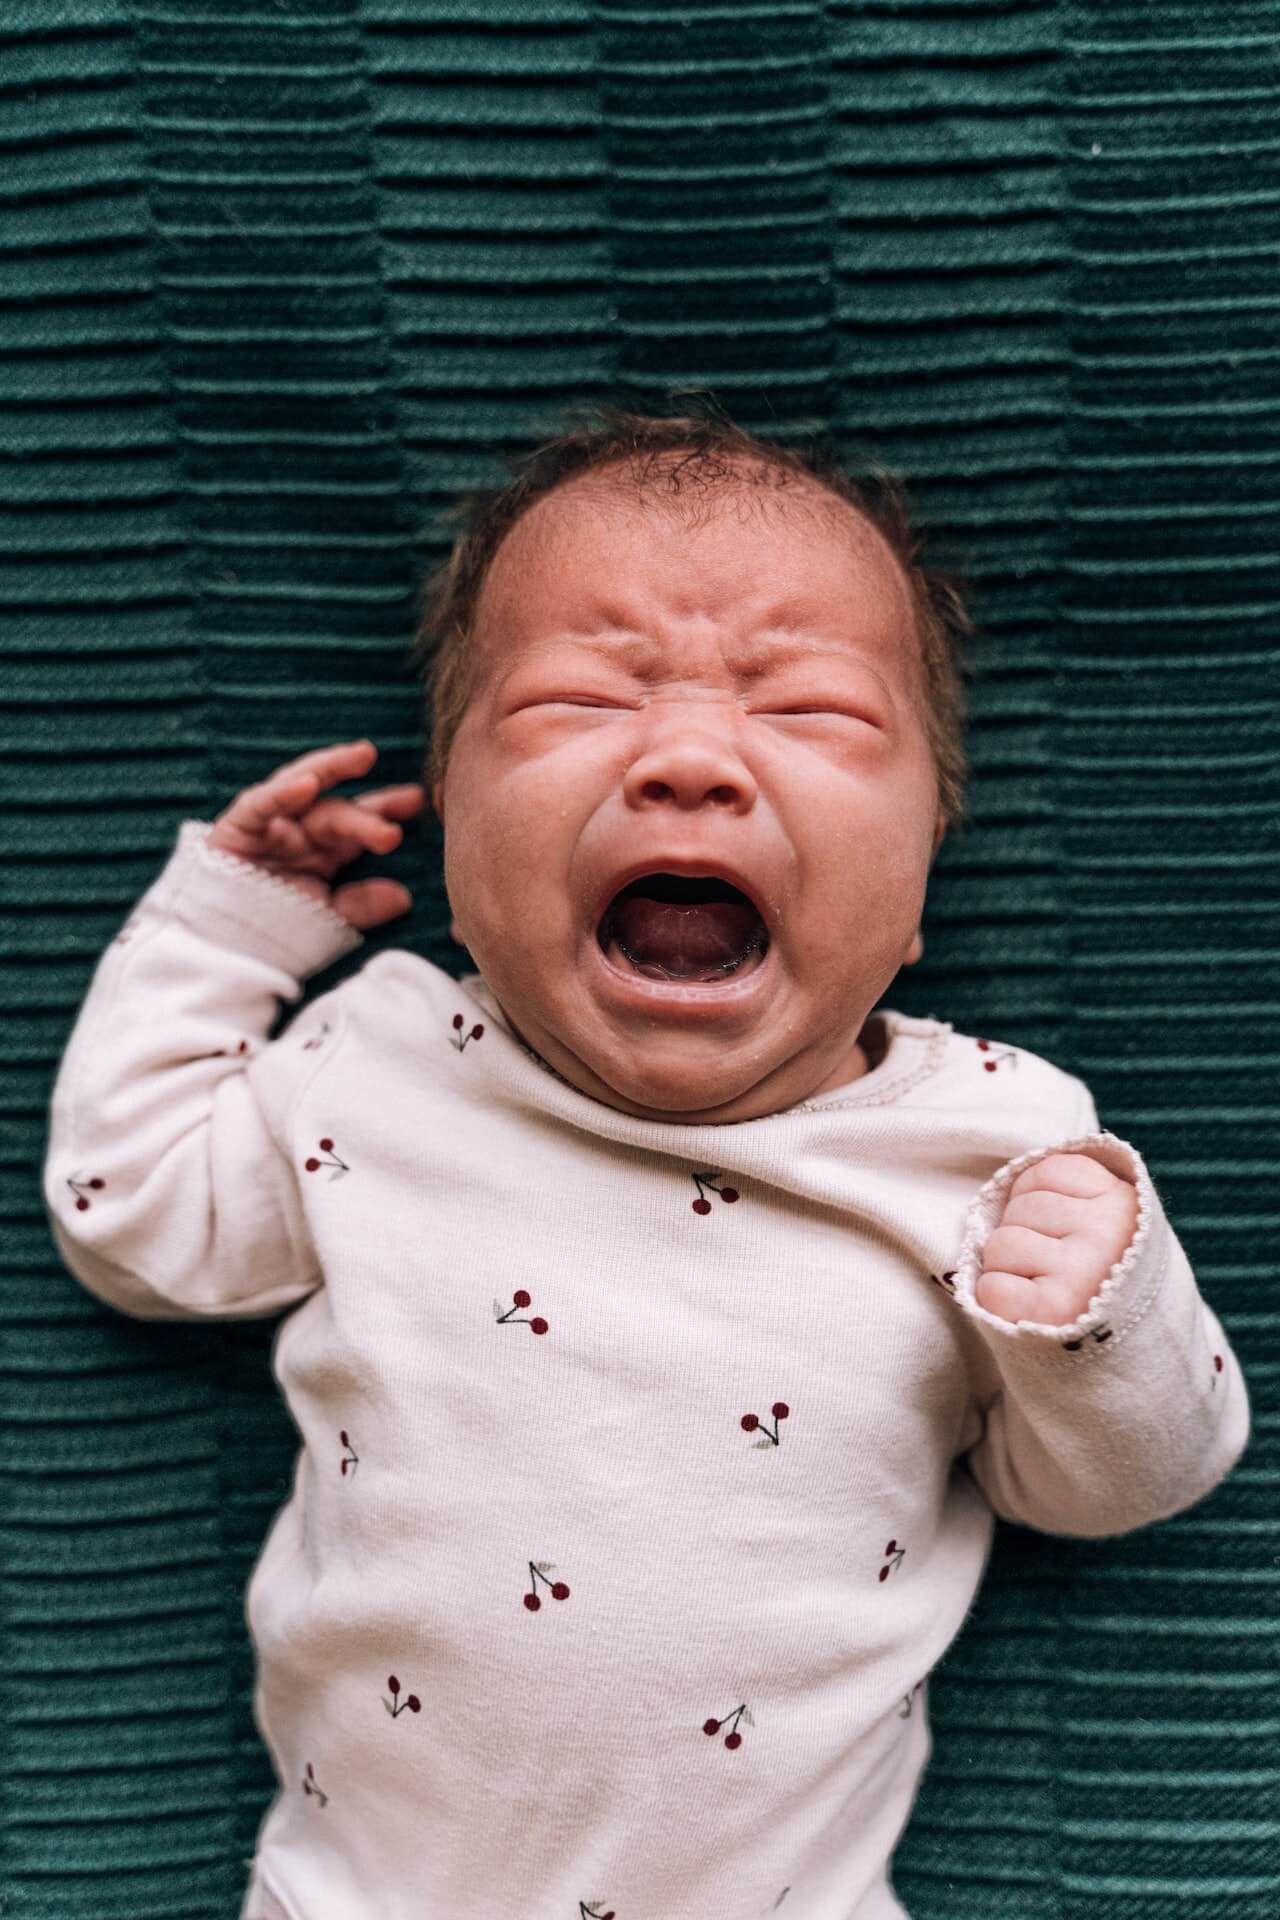 How Long Does Colic in Newborns Last?